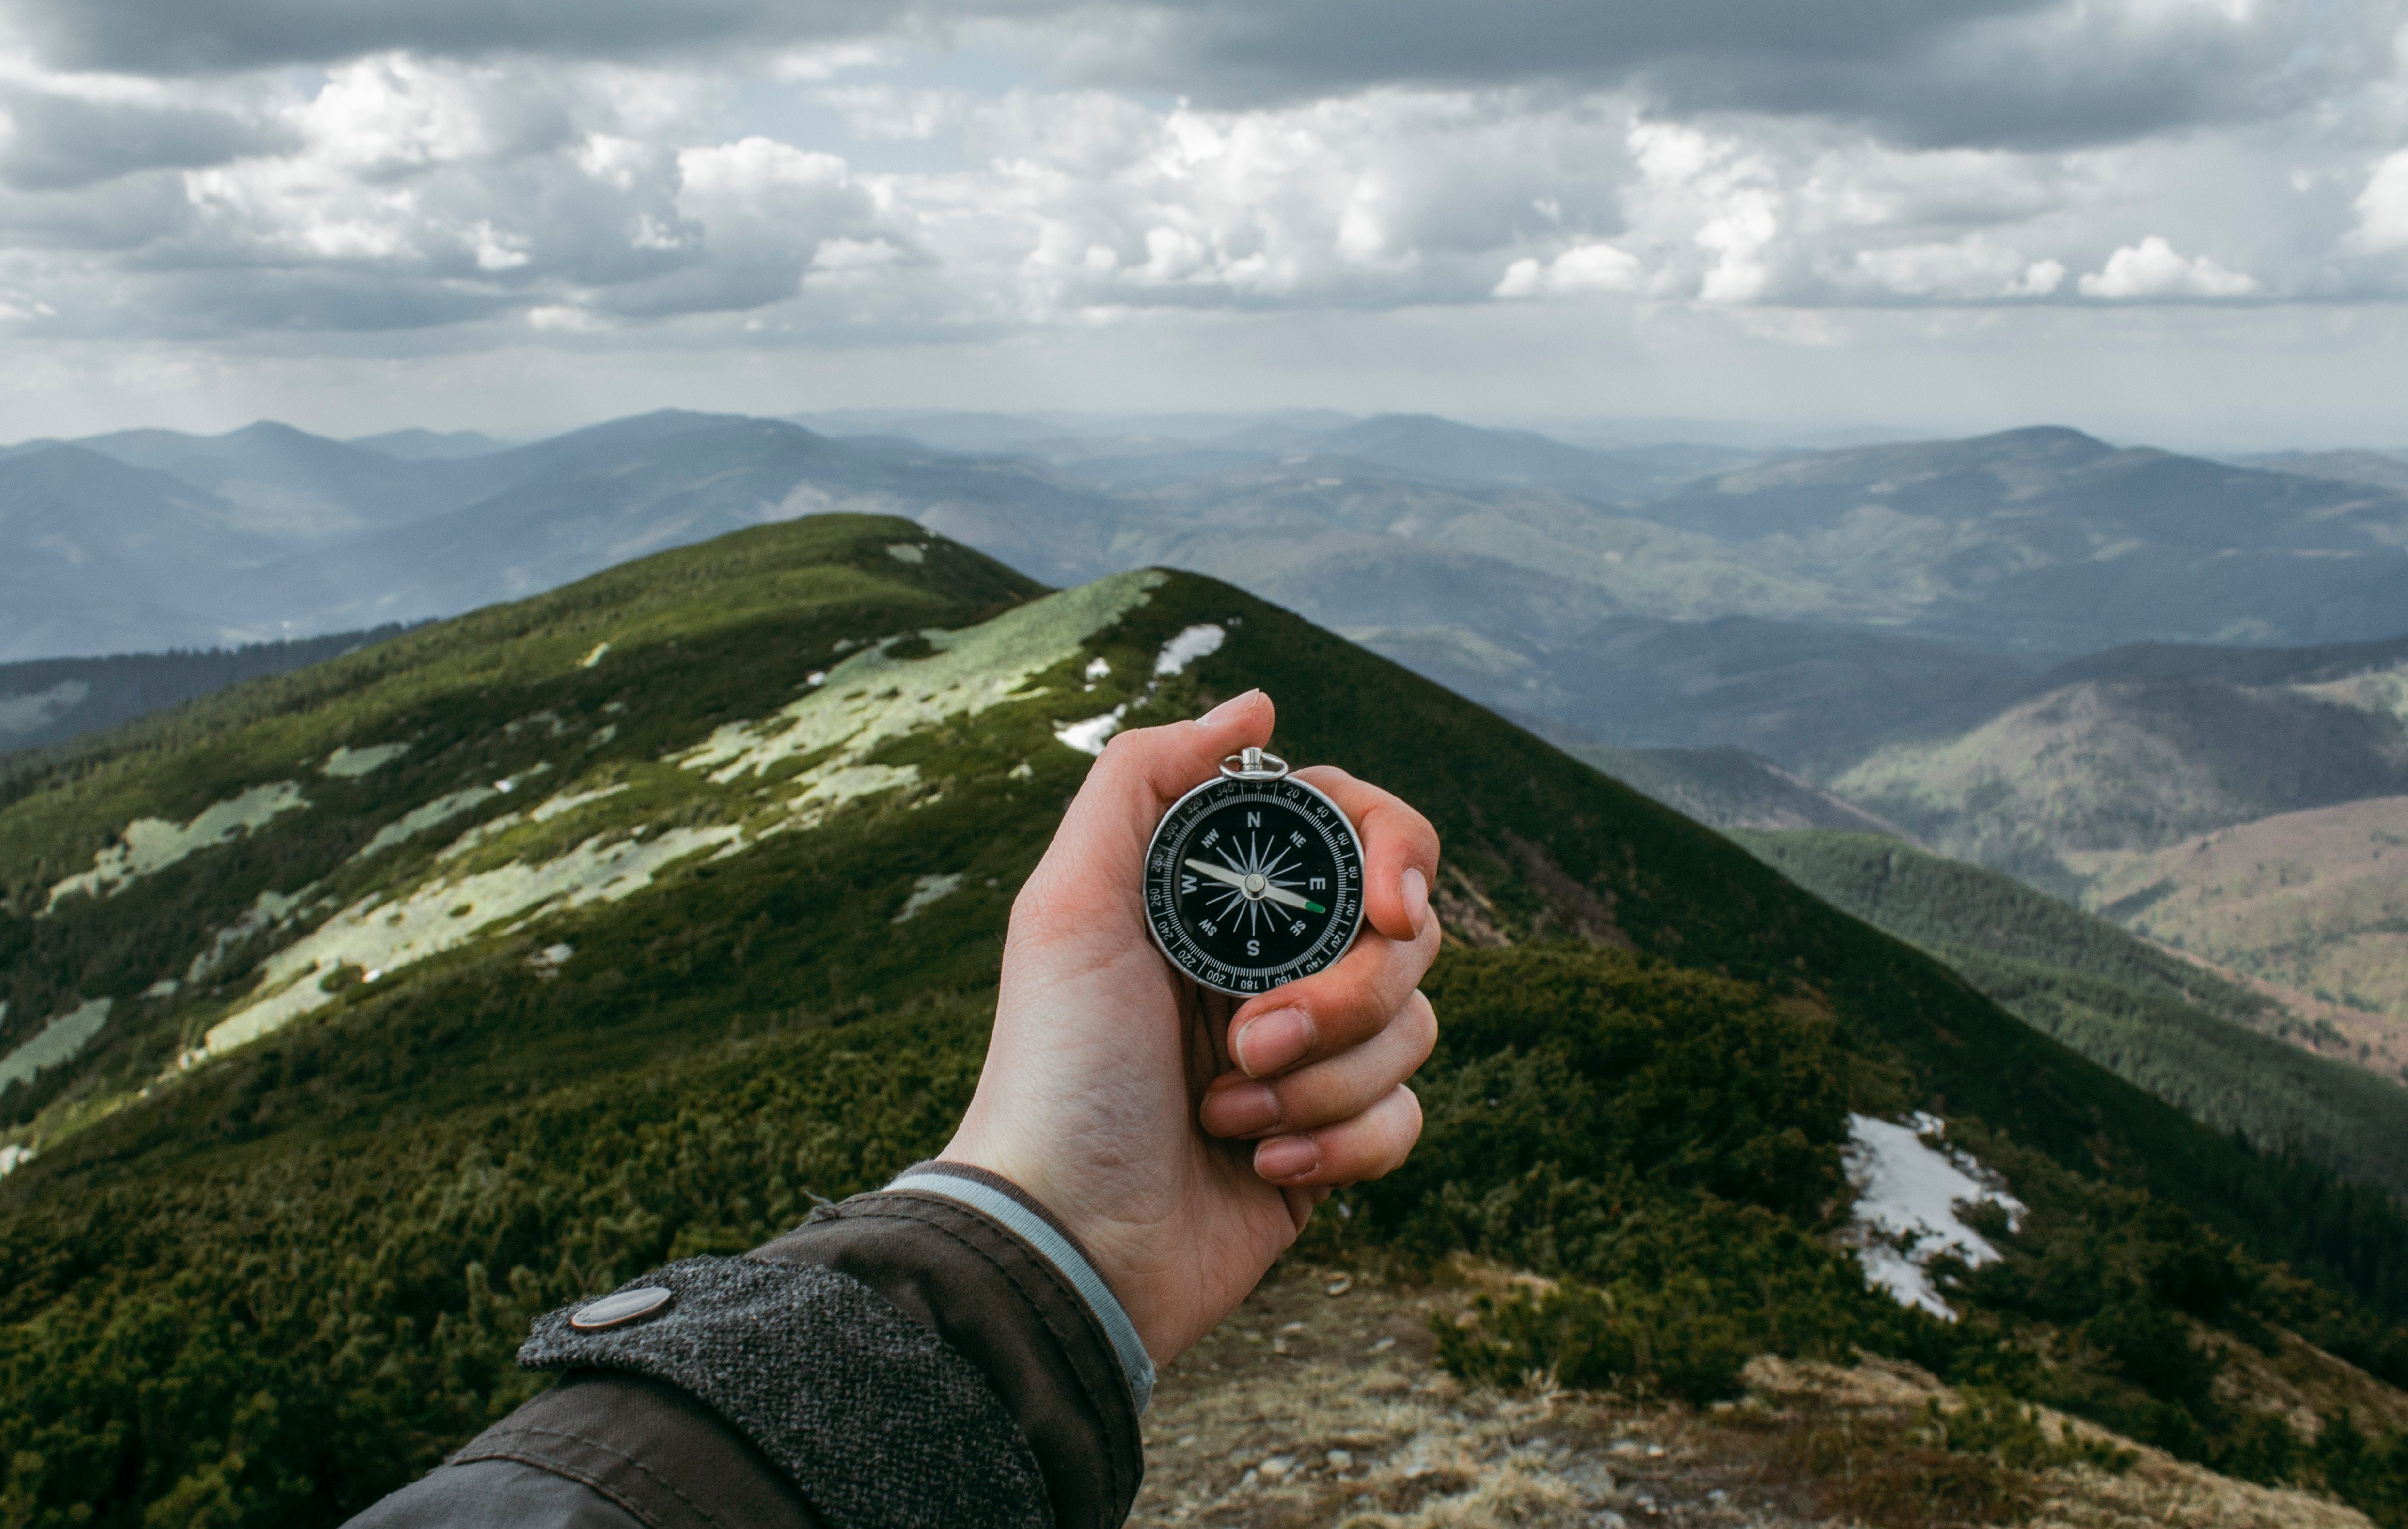 An image of a person holding compass and looking out over mountains